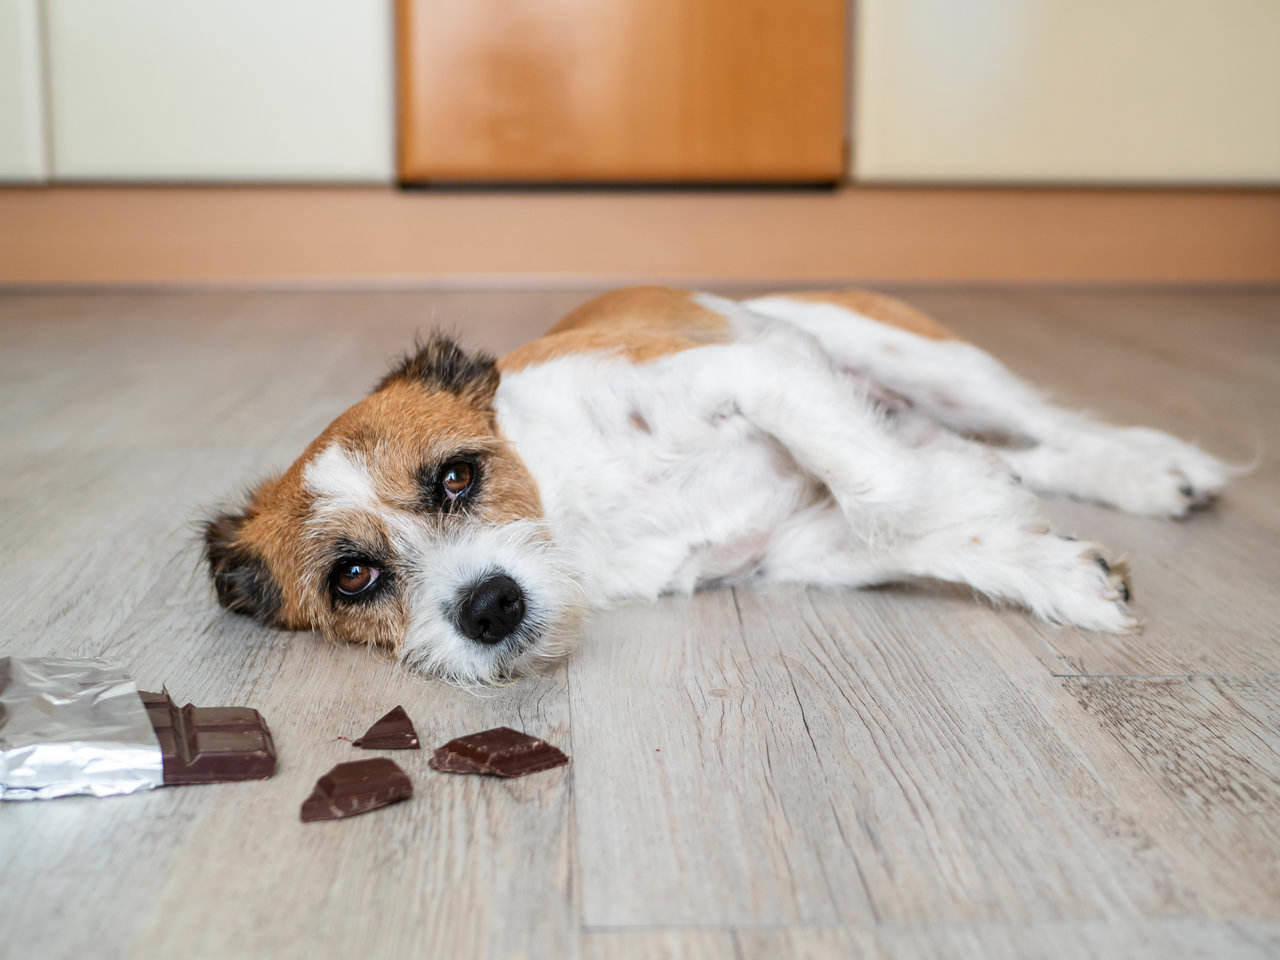 Why cant dogs eat chocolate Why cant dogs eat chocolate? Why is it bad for them?